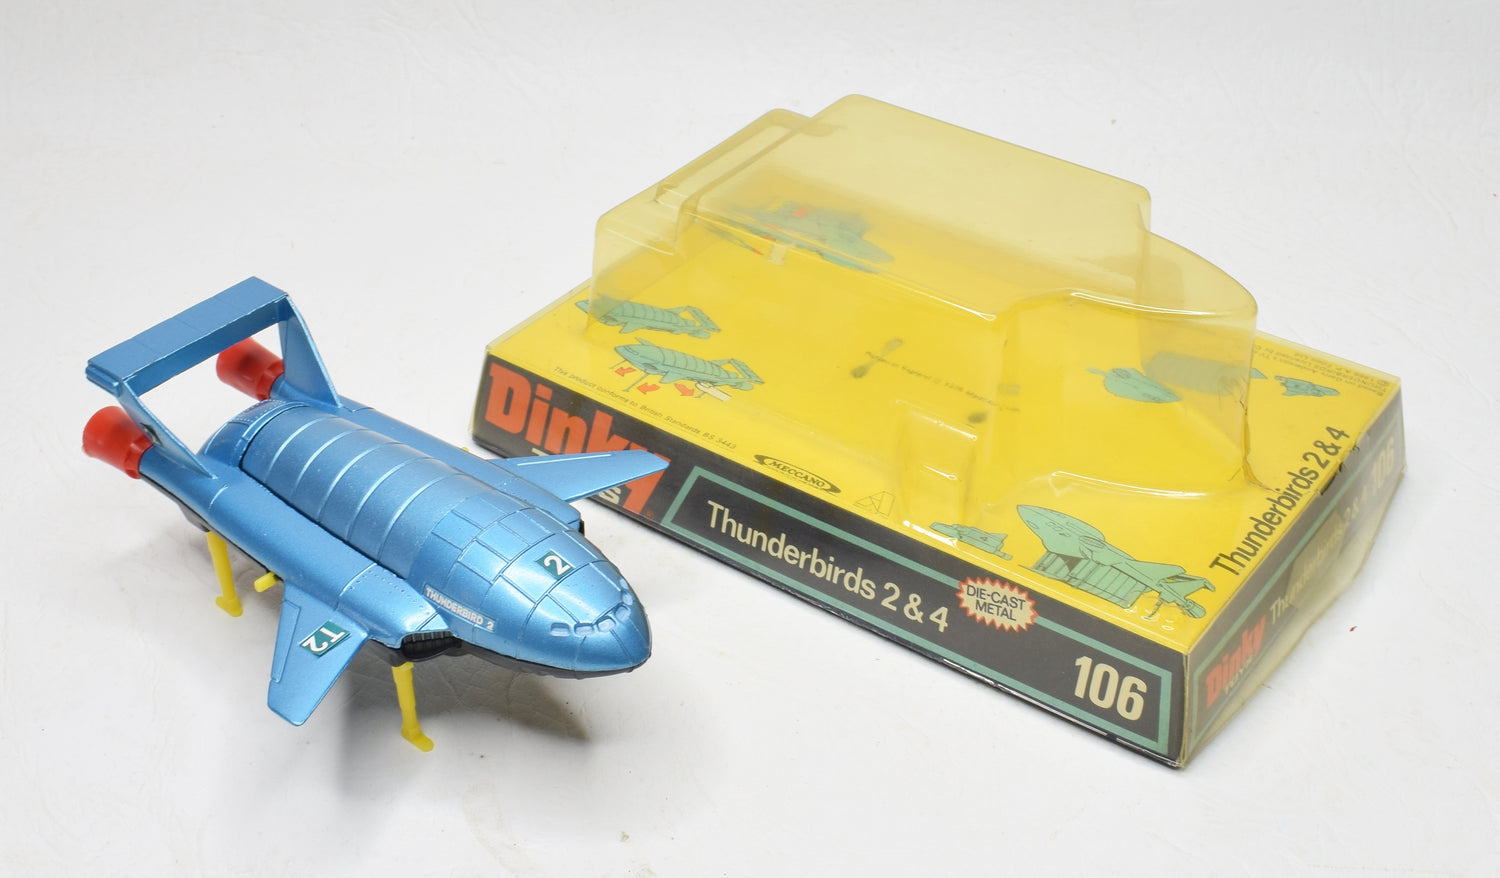 Dinky toy 106 Thunderbird 2 + 4 Very Near Mint/Boxed (Yellow plinth & black base) 'The Lane' Collection